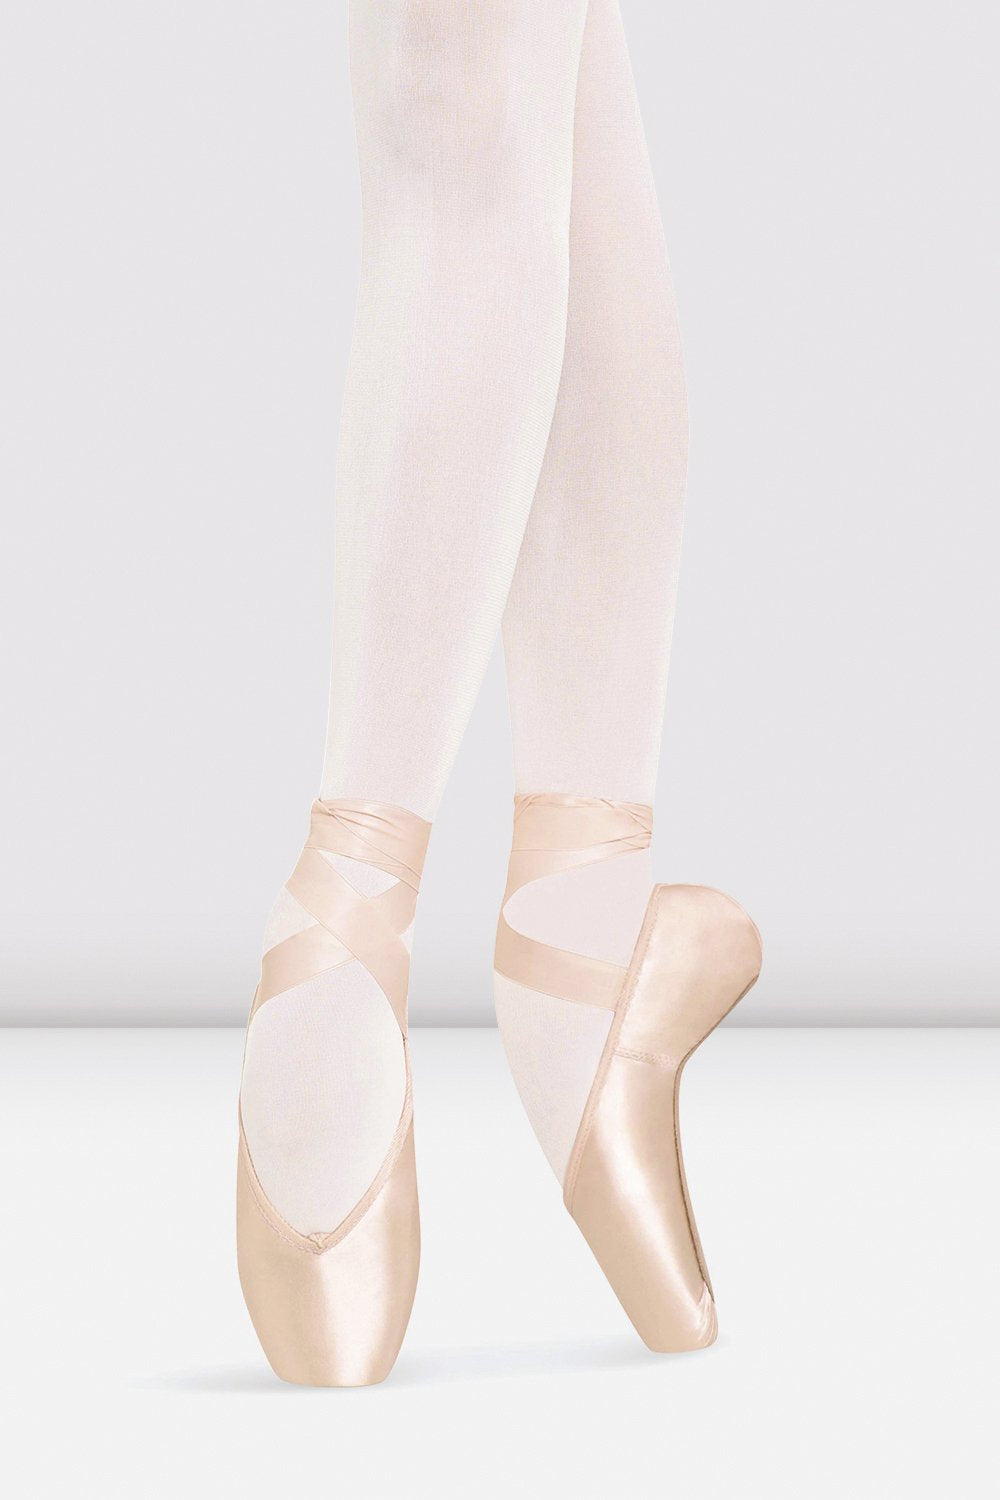 how much do ballet shoes cost